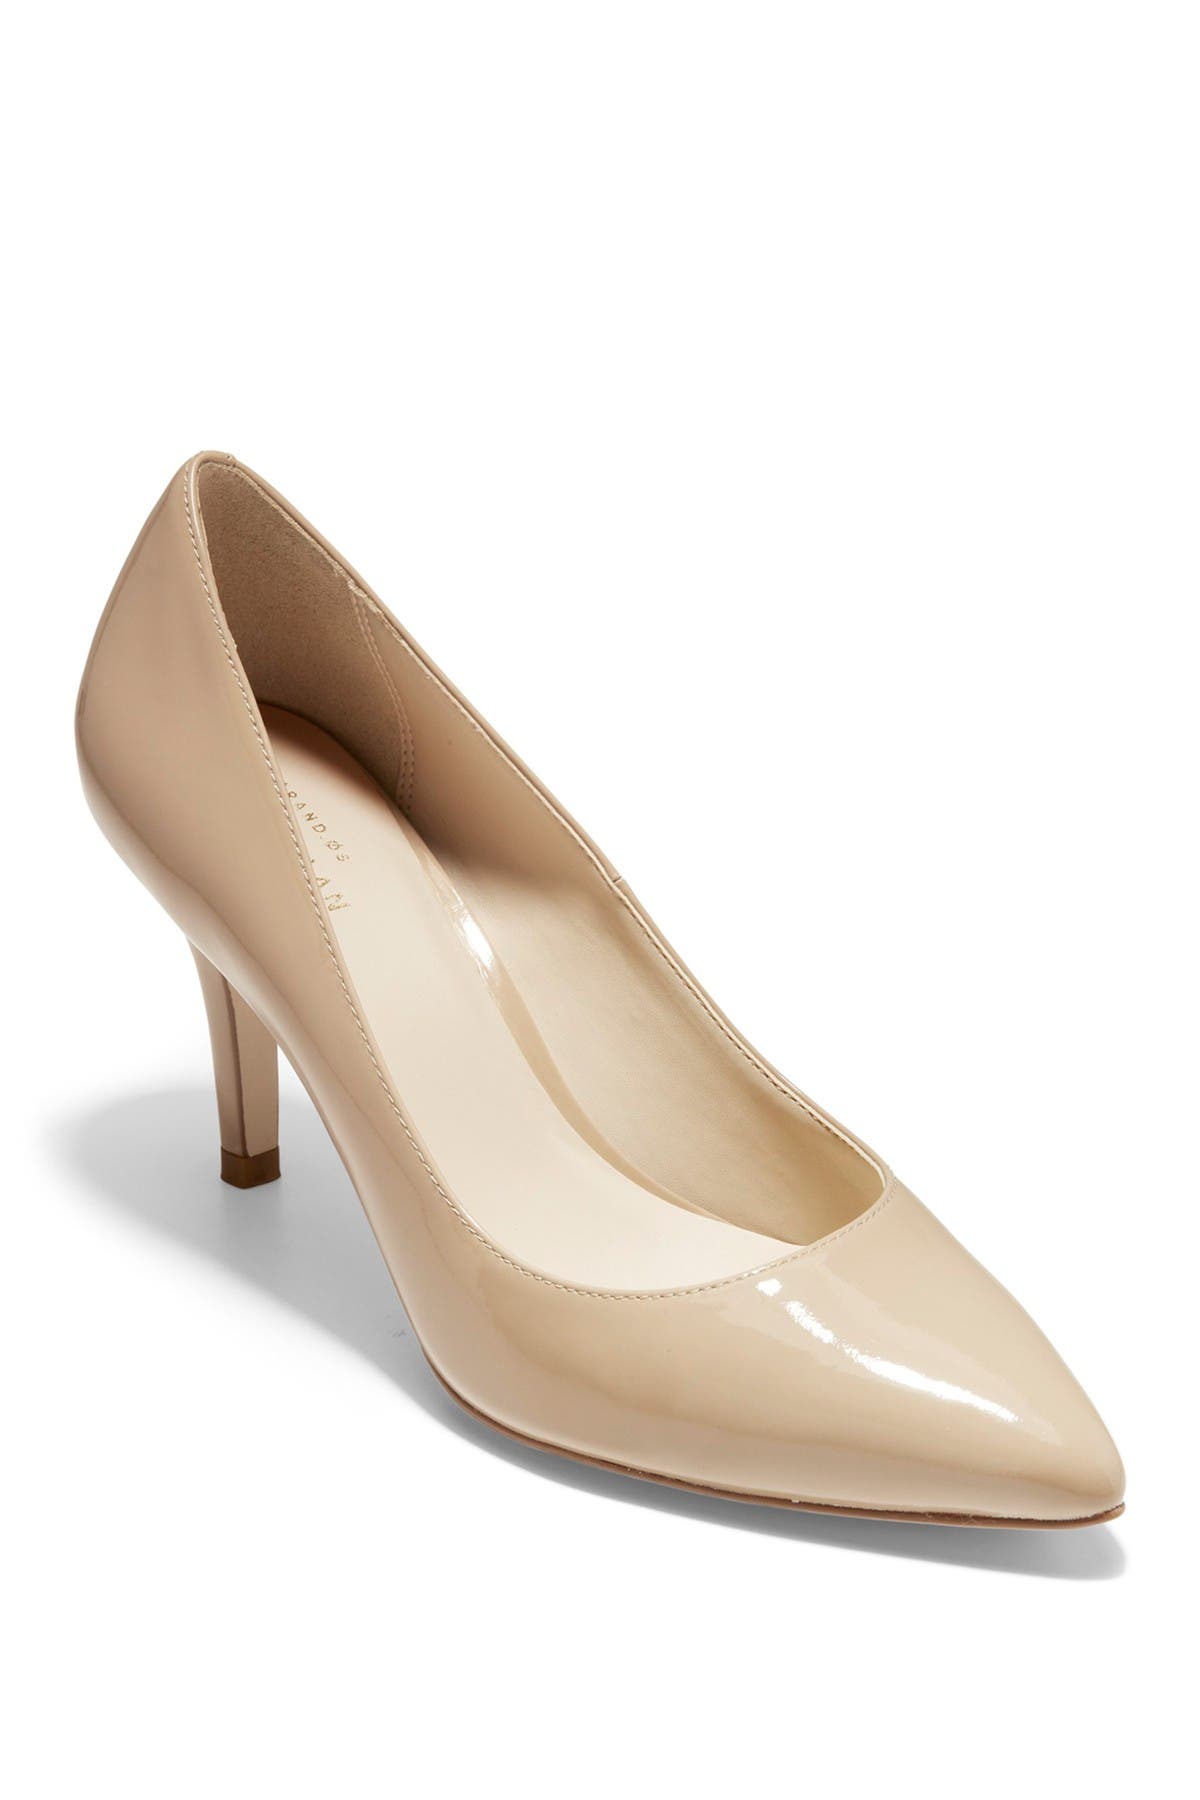 cole haan patent leather pumps